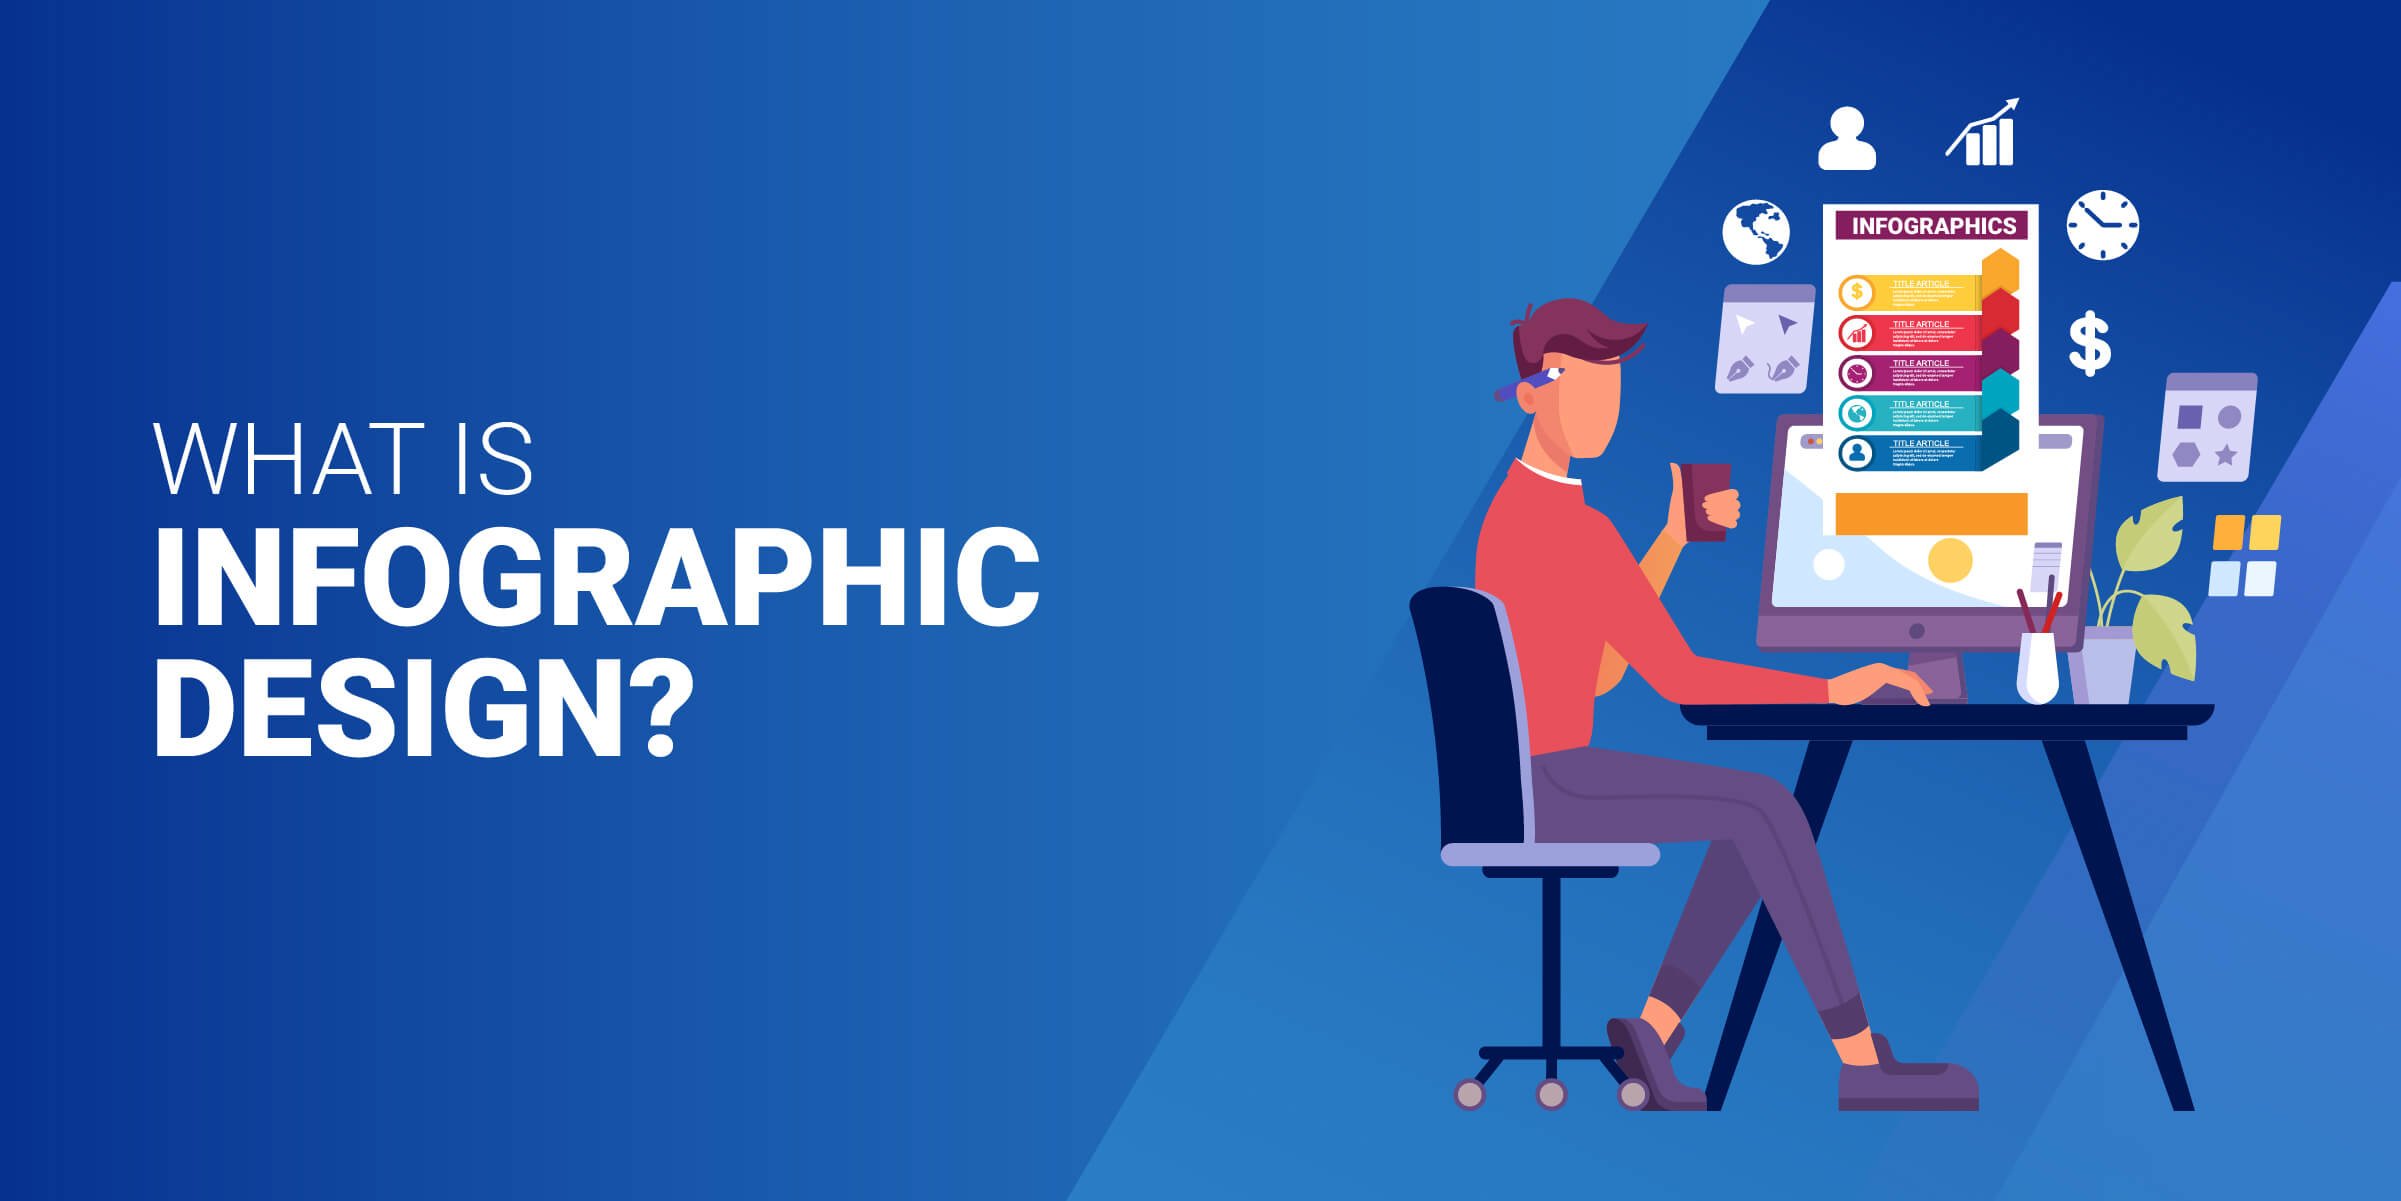 What Is Infographic Design